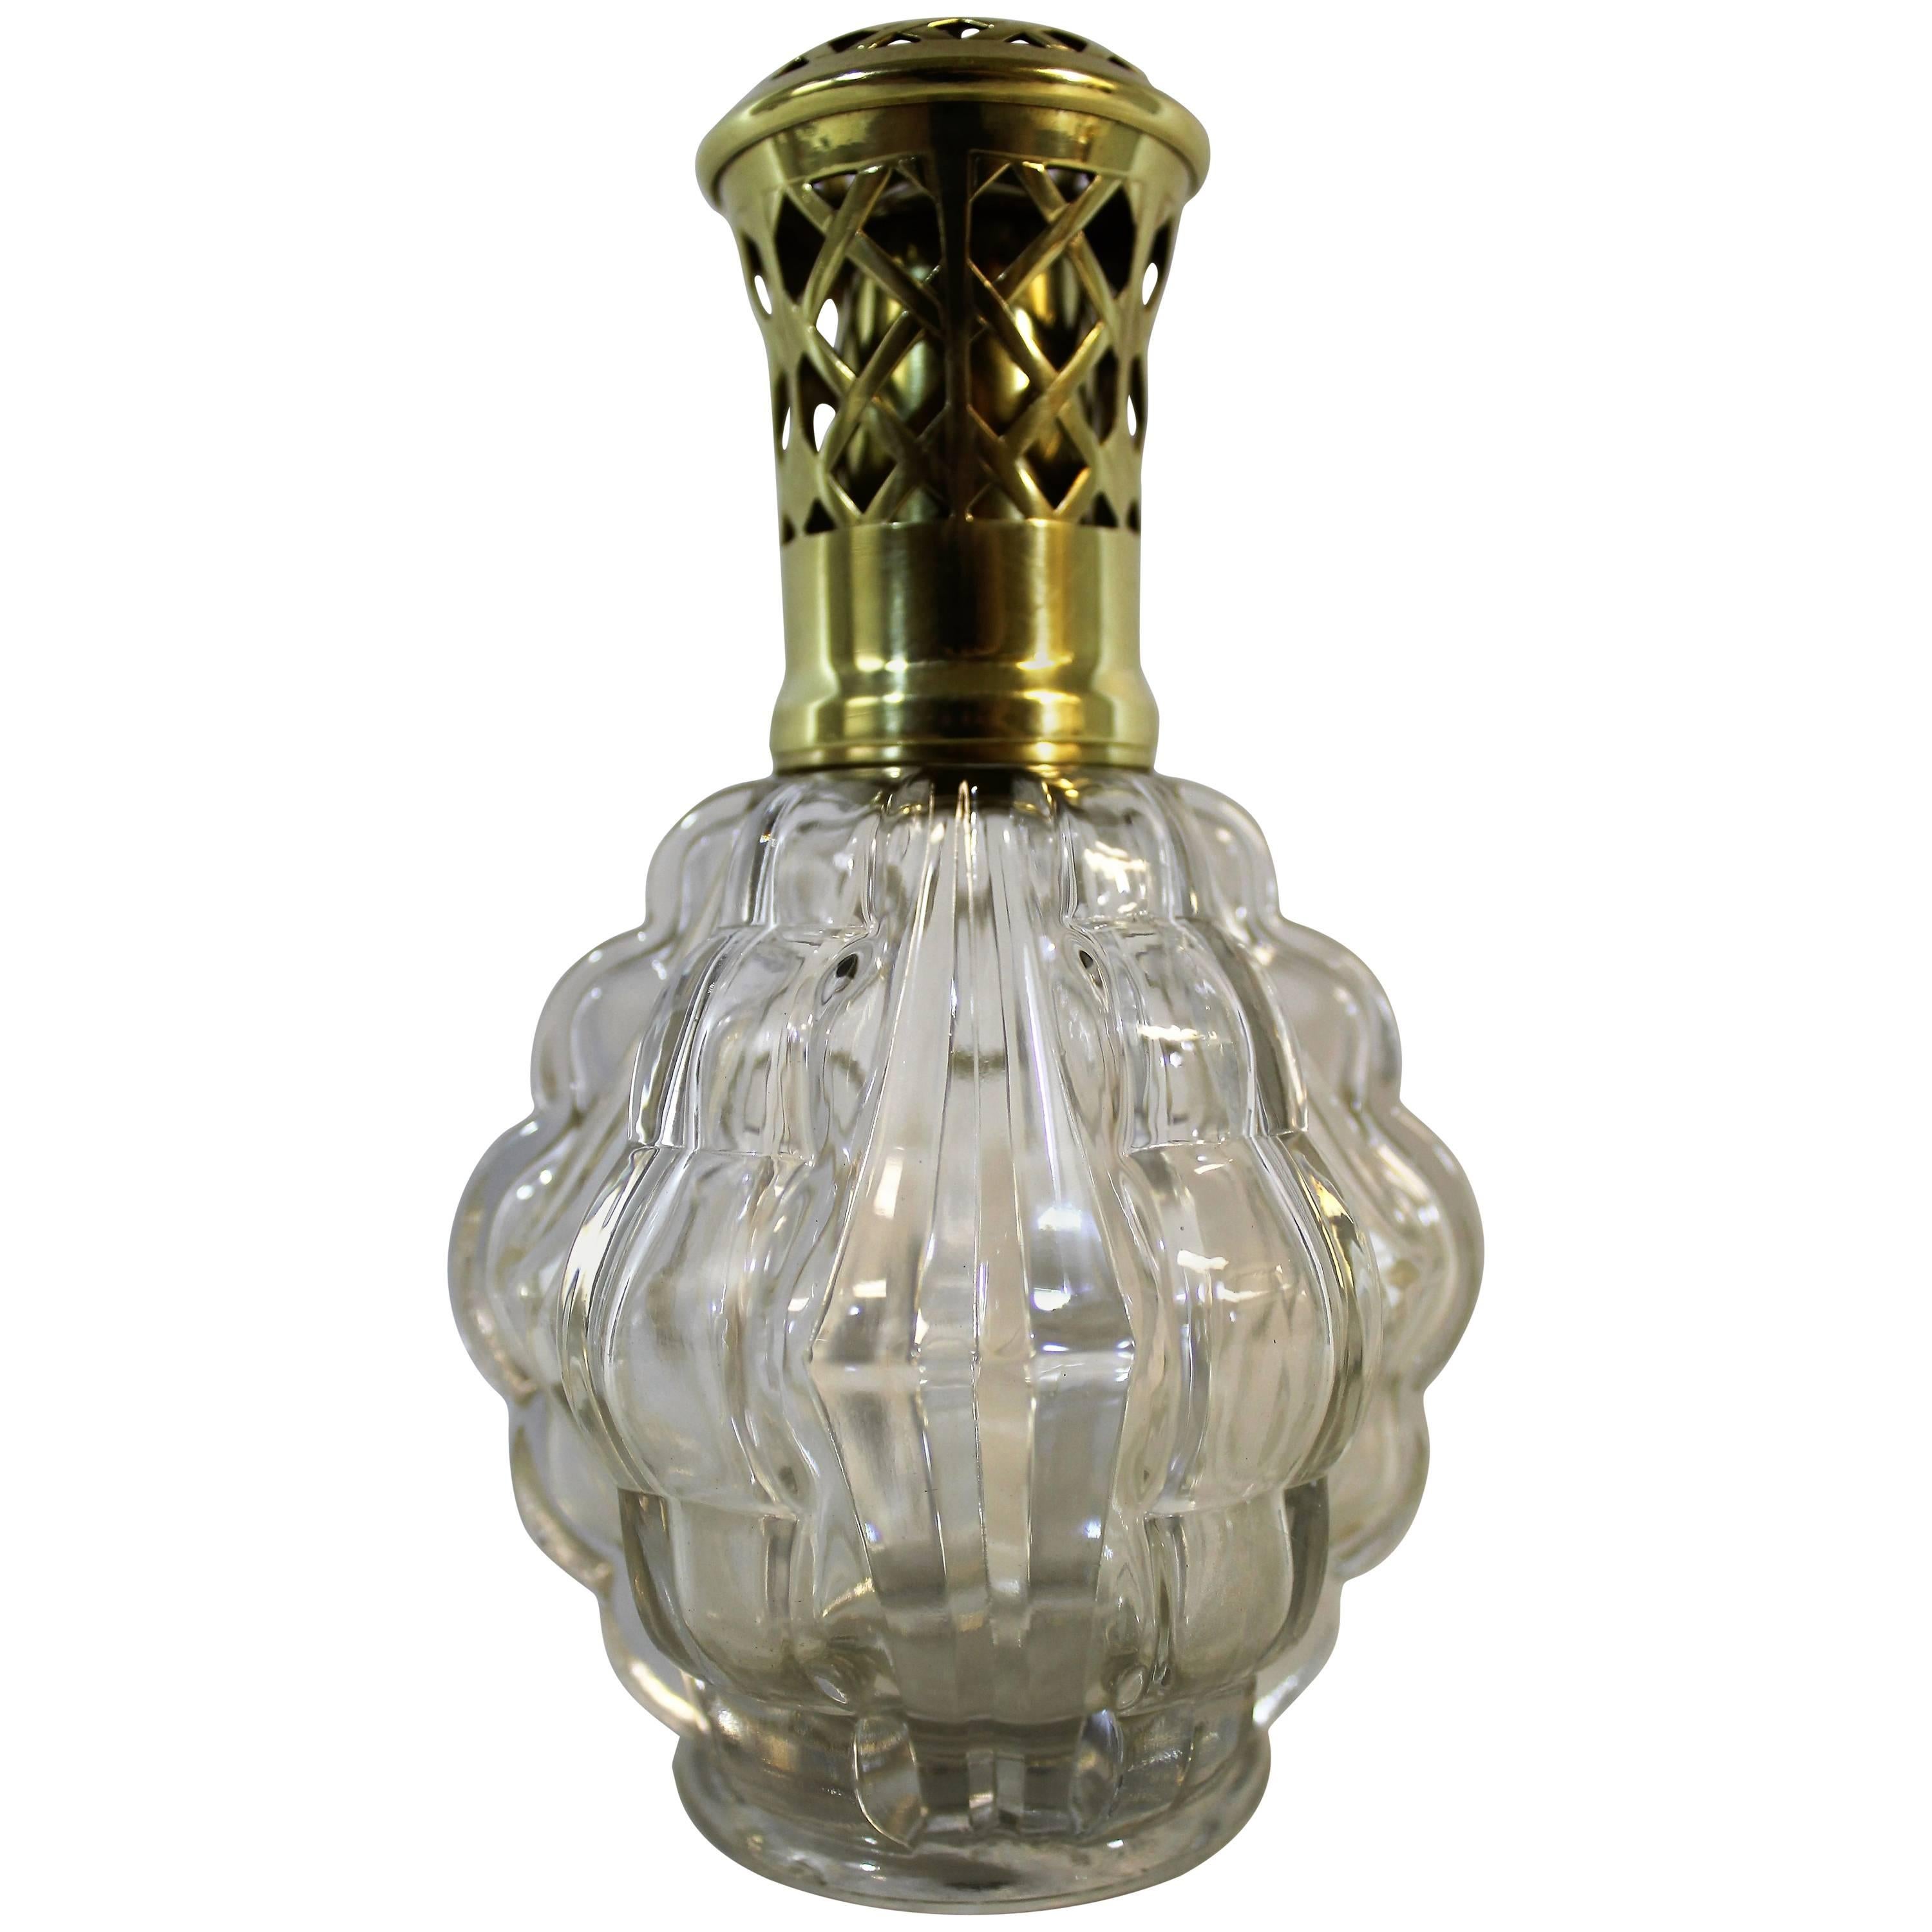 Baccarat 'Verre Moule' French Lampe Berger